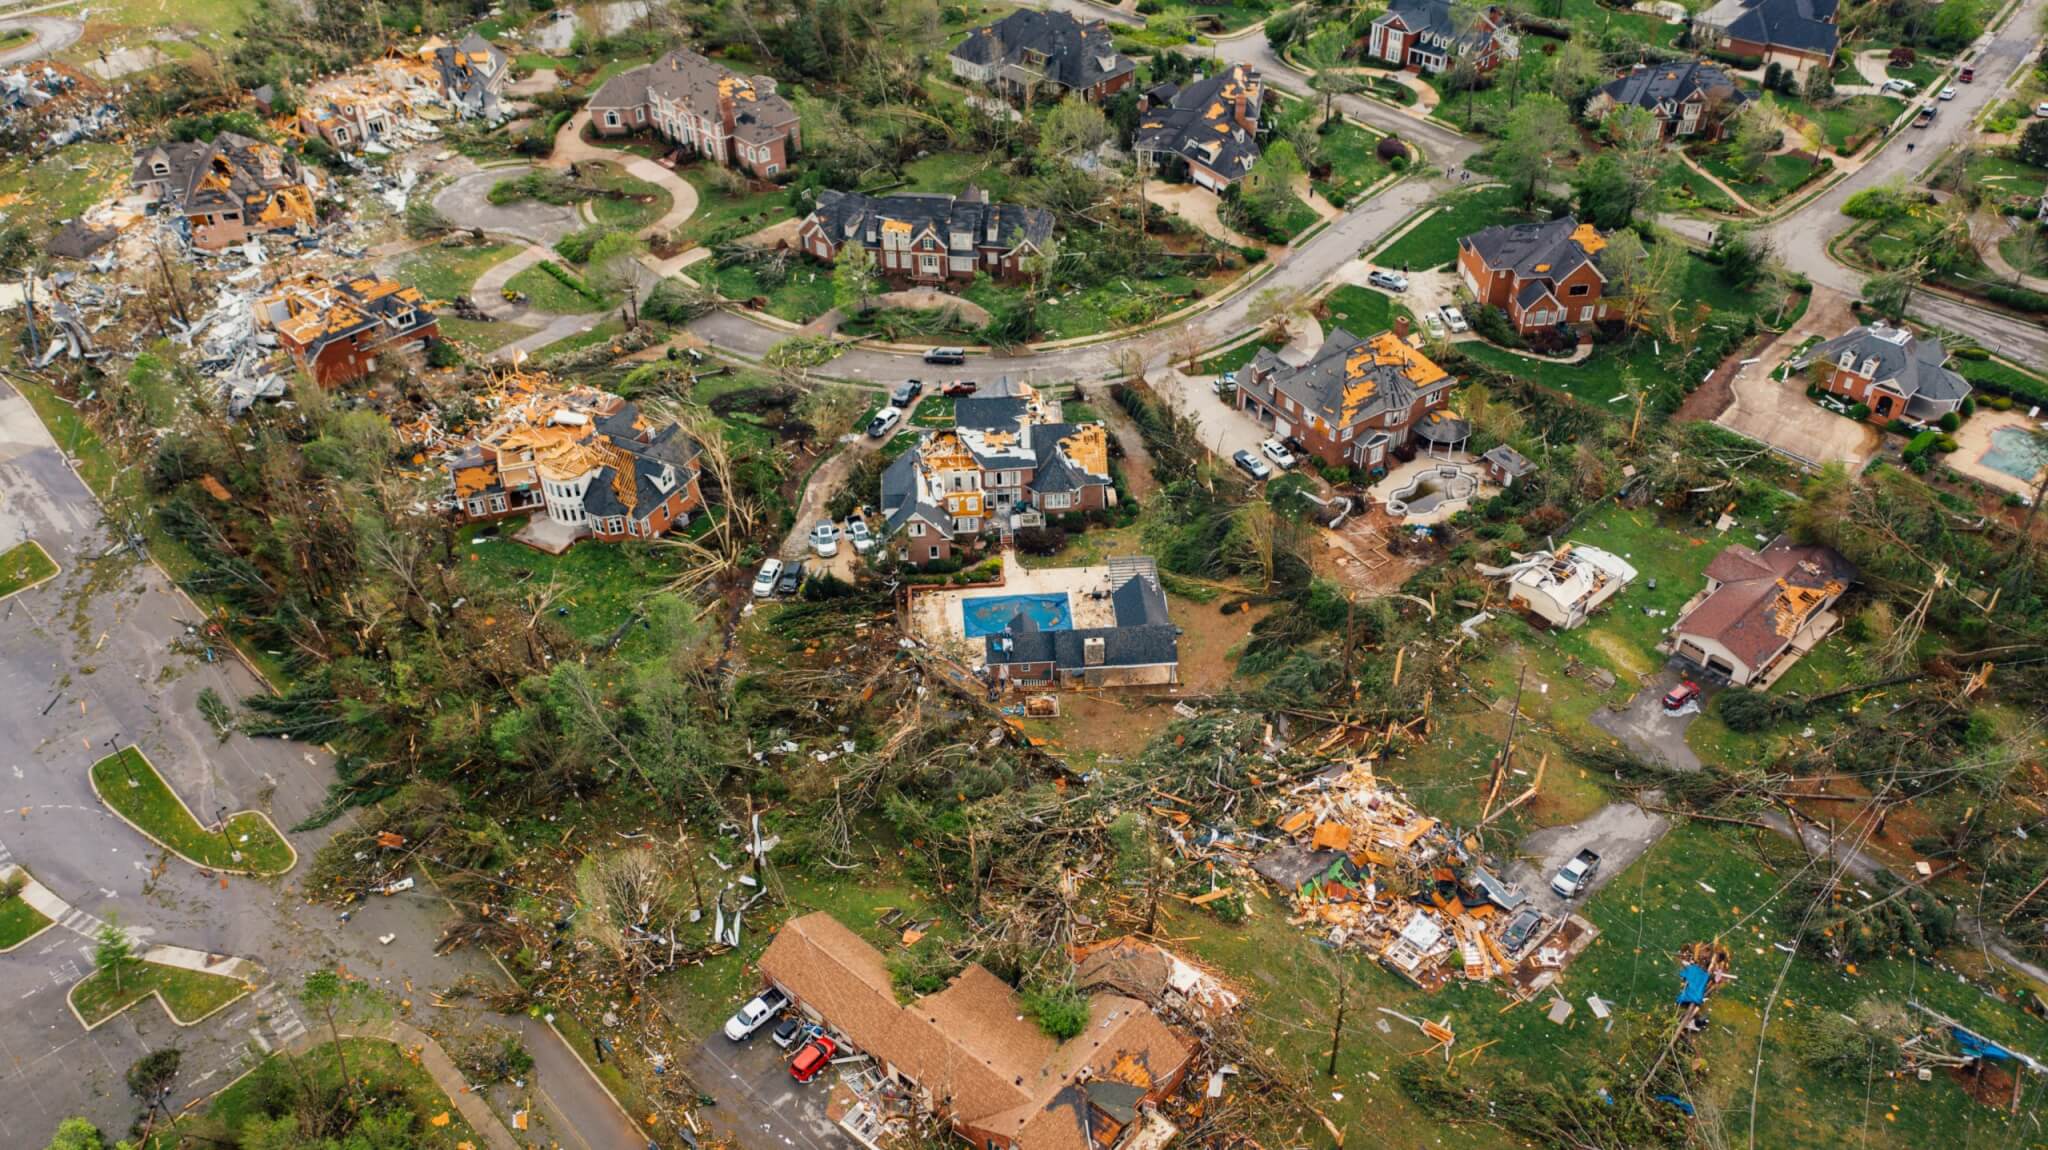 Homes damaged and destroyed by a hurricane.